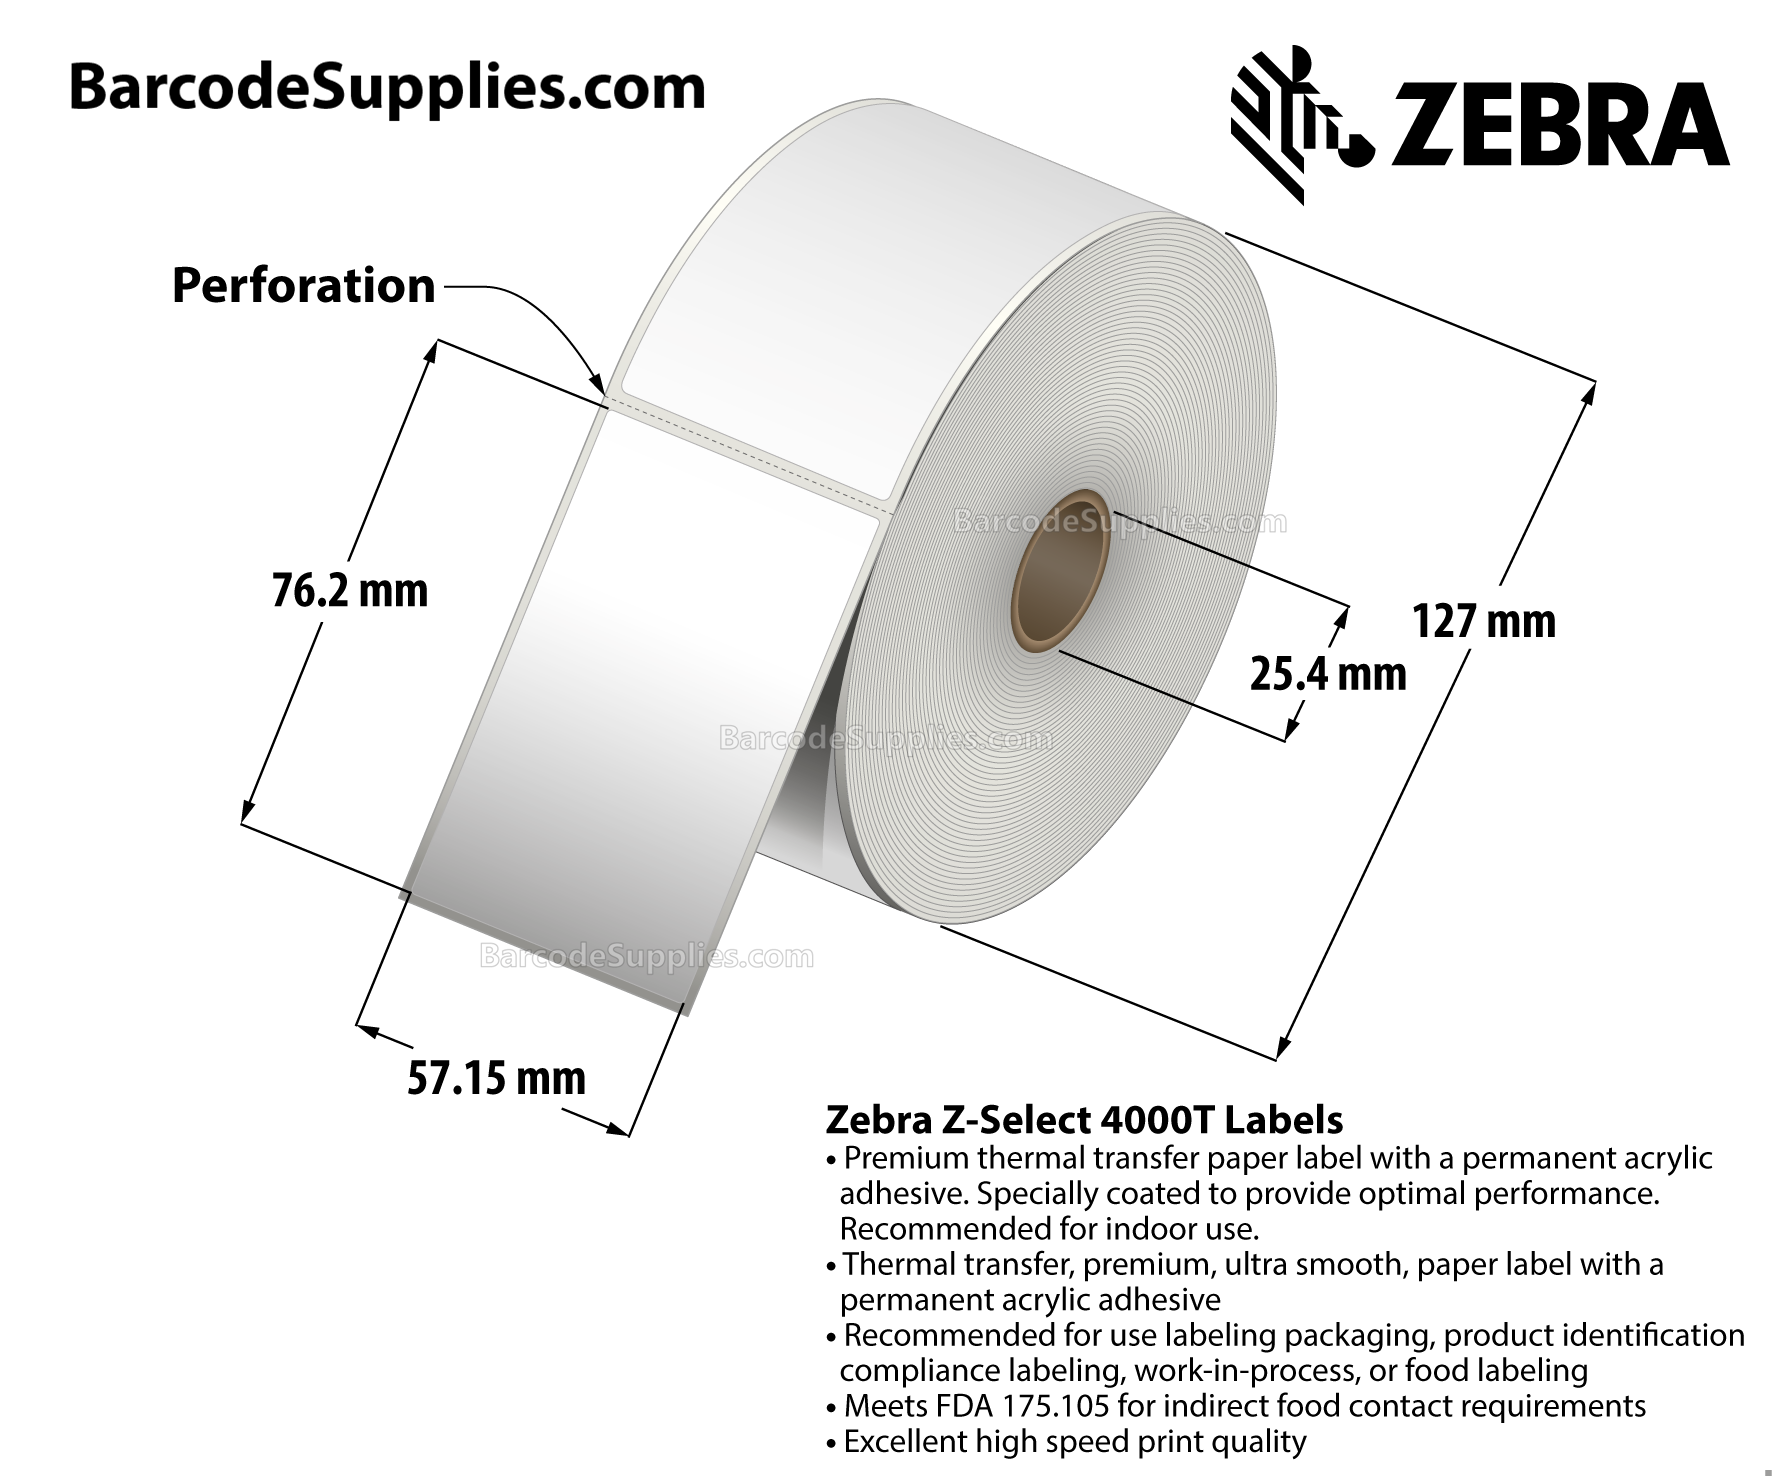 2.25 x 4 Thermal Transfer White Z-Select 4000T Labels With Permanent Adhesive - Perforated - 700 Labels Per Roll - Carton Of 6 Rolls - 4200 Labels Total - MPN: 10009527